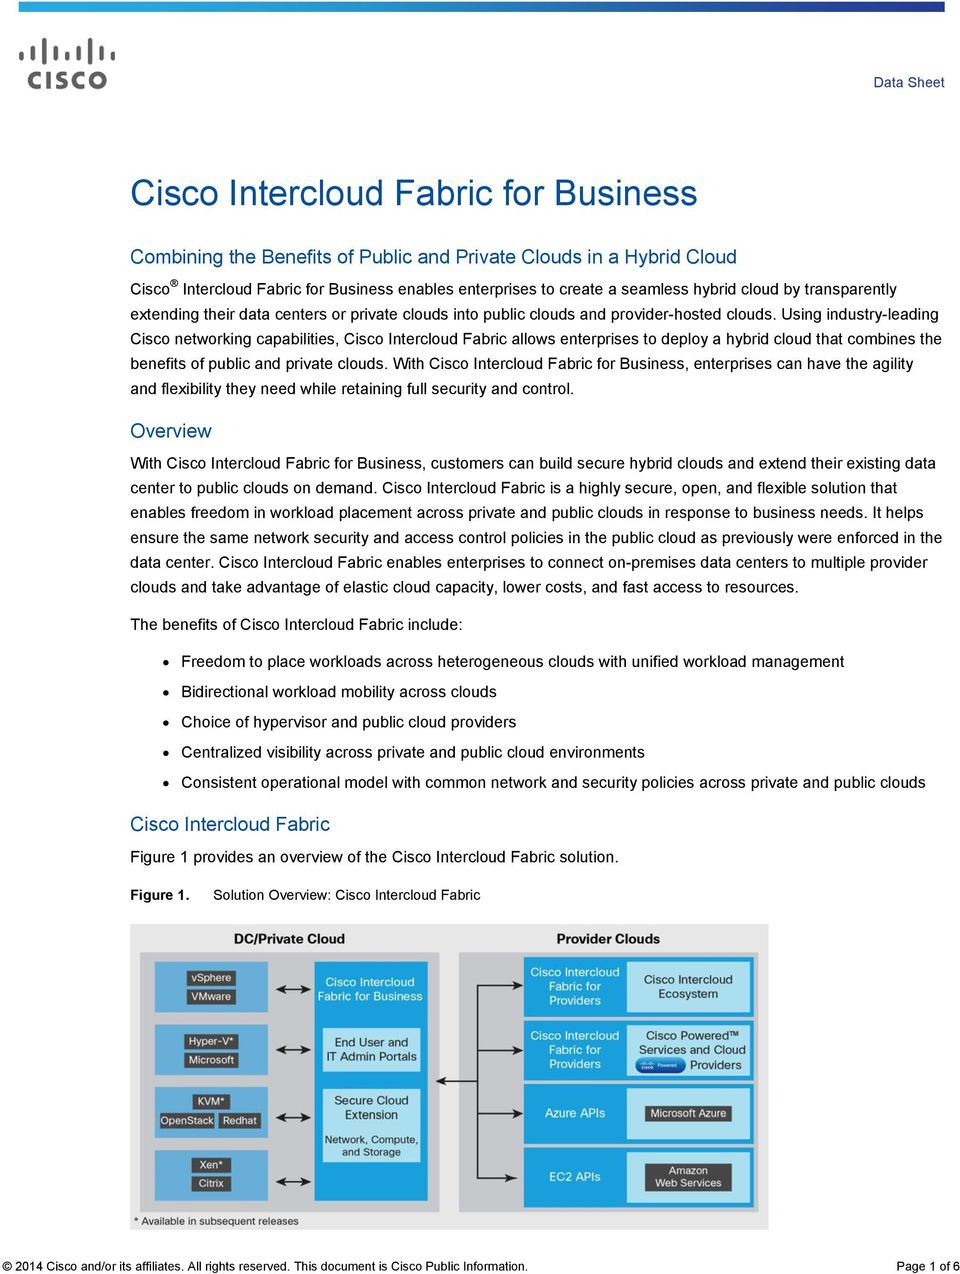 Using industry-leading Cisco networking capabilities, Cisco Intercloud Fabric allows enterprises to deploy a hybrid cloud that combines the benefits of public and private clouds.